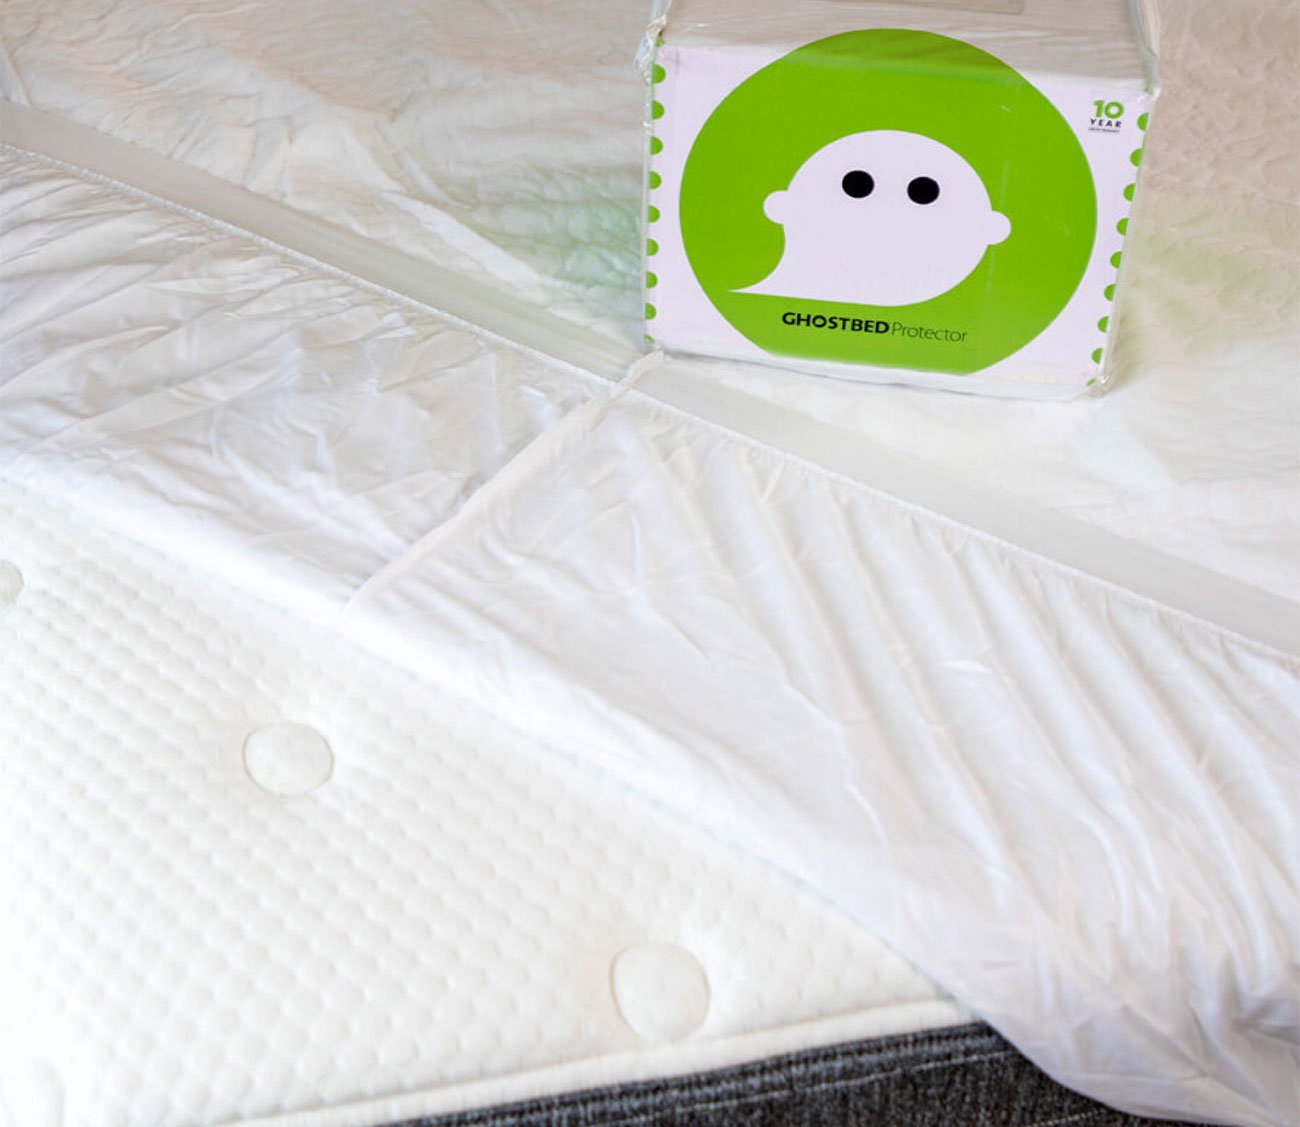 https://cdn.shopify.com/s/files/1/2420/9425/products/waterproof-mattress-protector-by-ghostbed-112064.jpg?v=1683669124